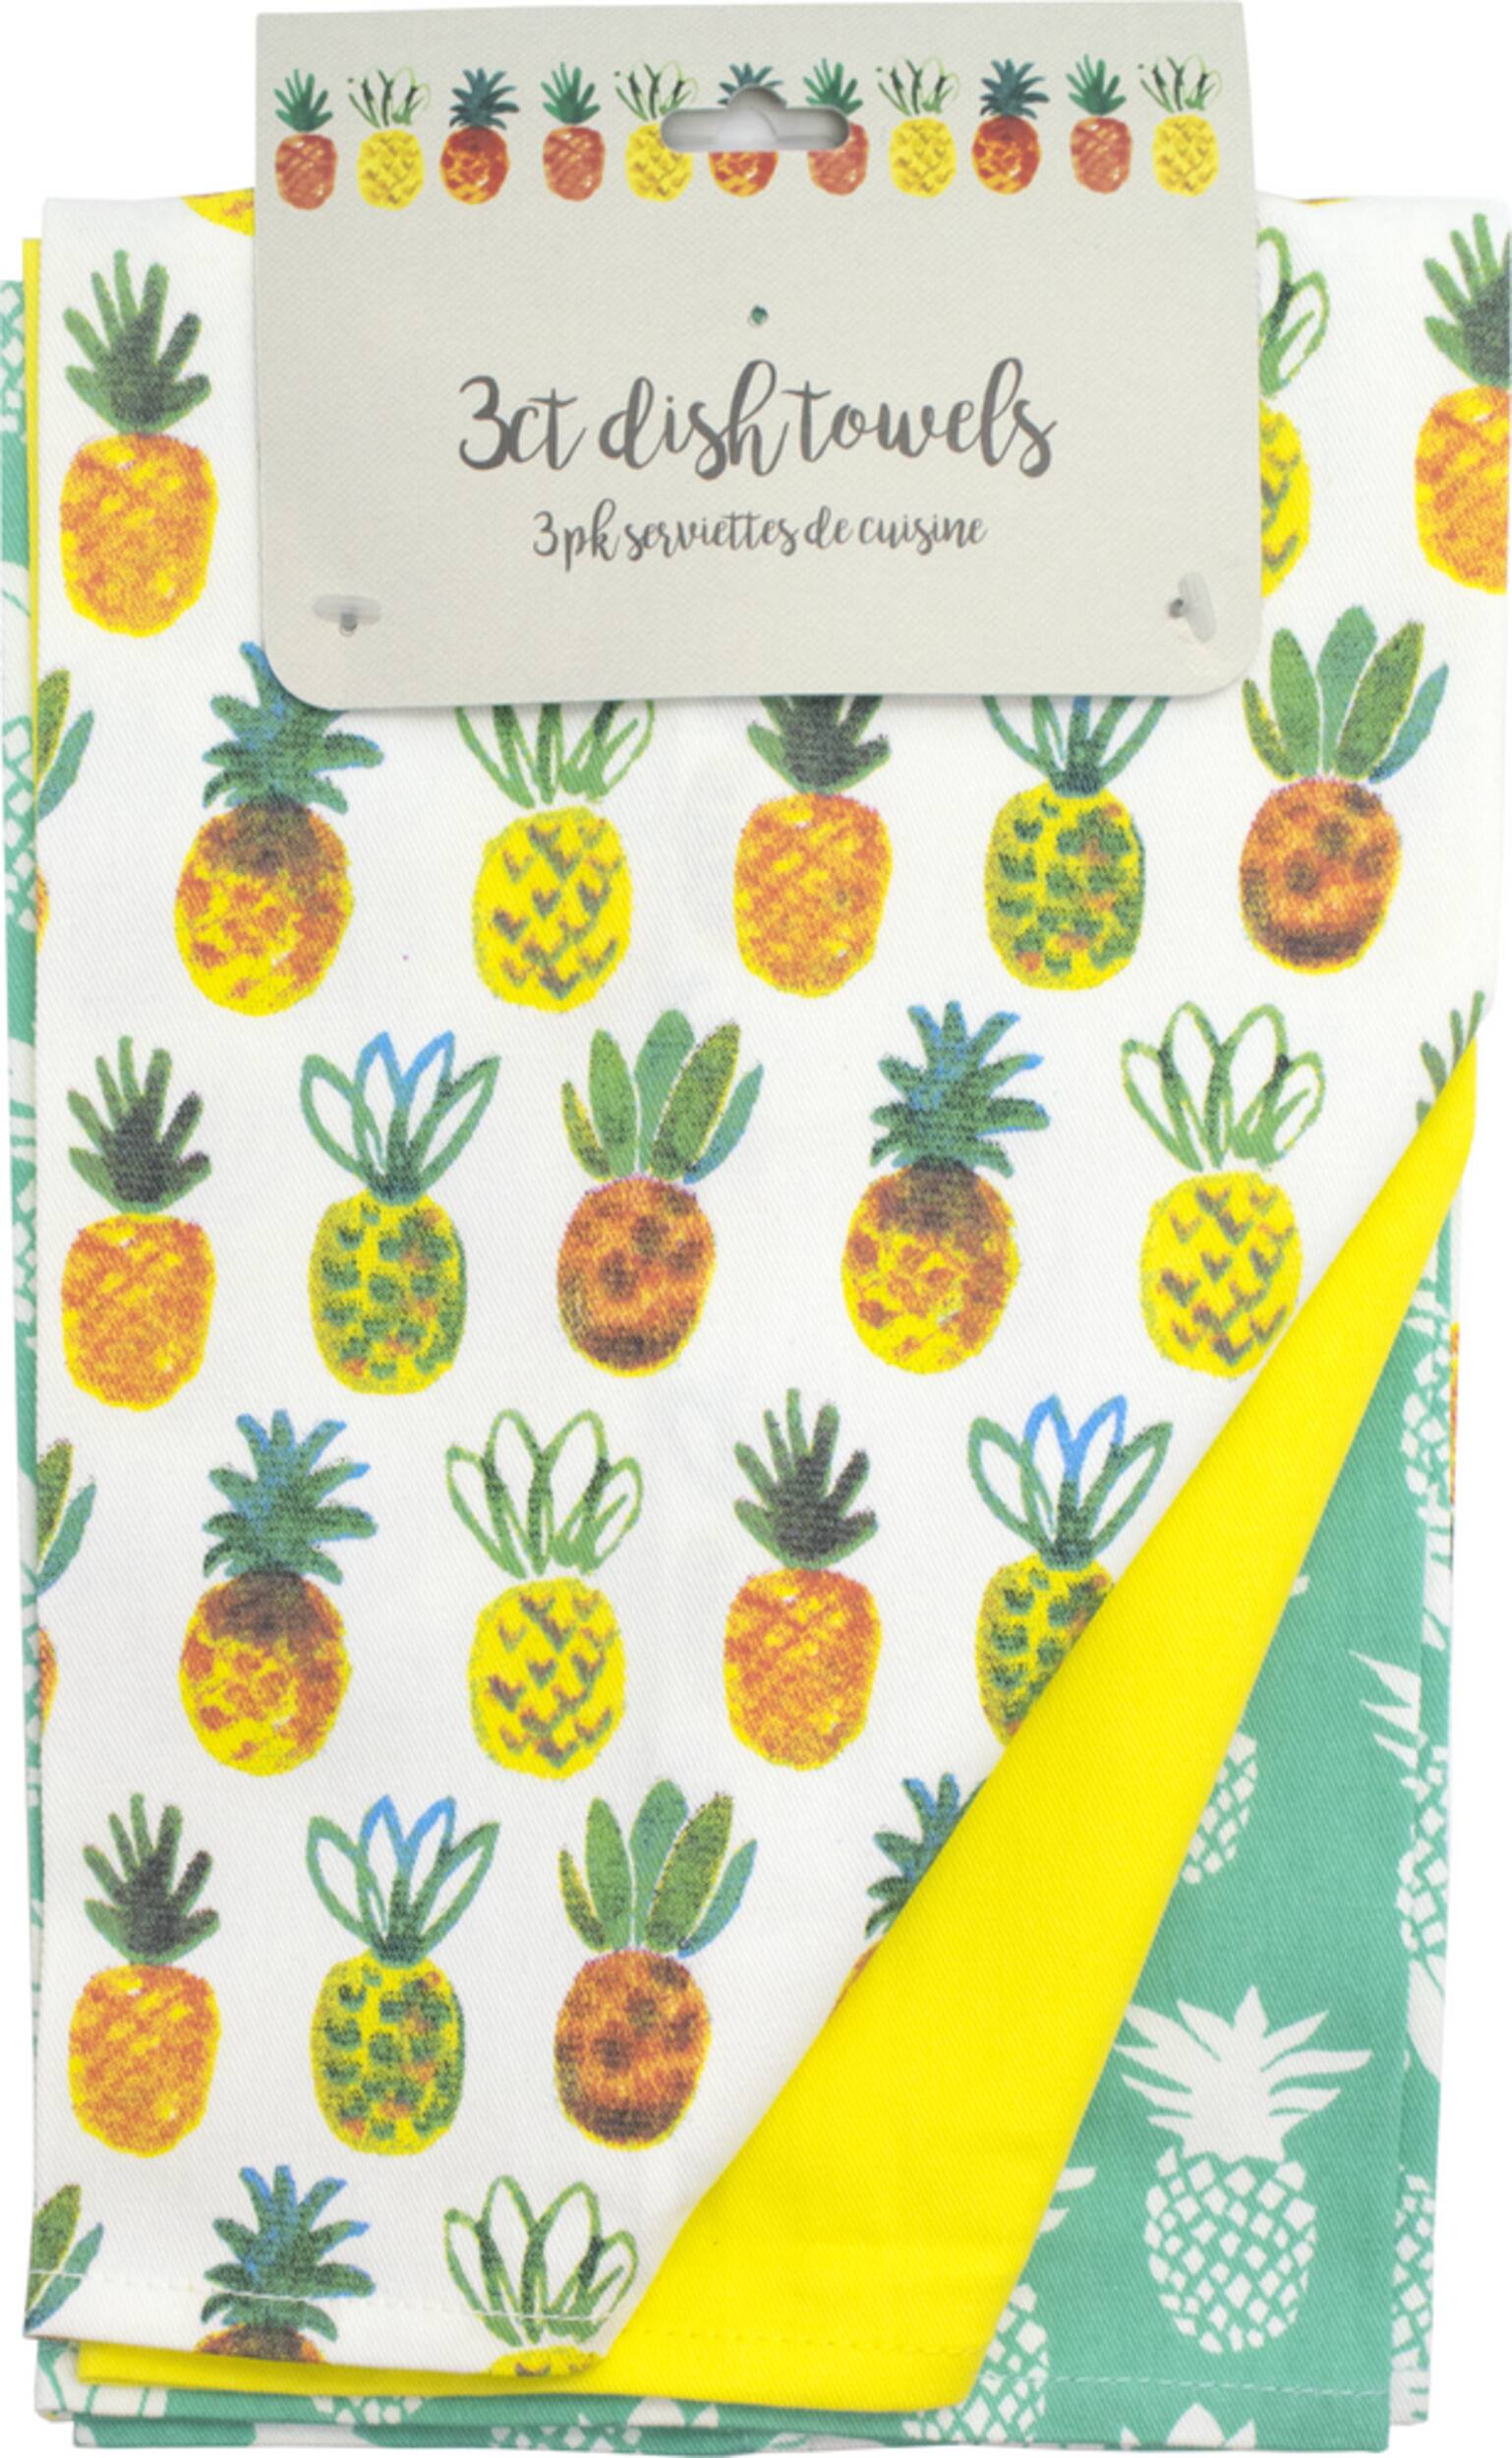 Pineapple Kitchen Towels 3ct 0fdeef2b 9989 4505 910d 16e05c8580f1 ?imdensity=1&imwidth=640&impolicy=gZoom